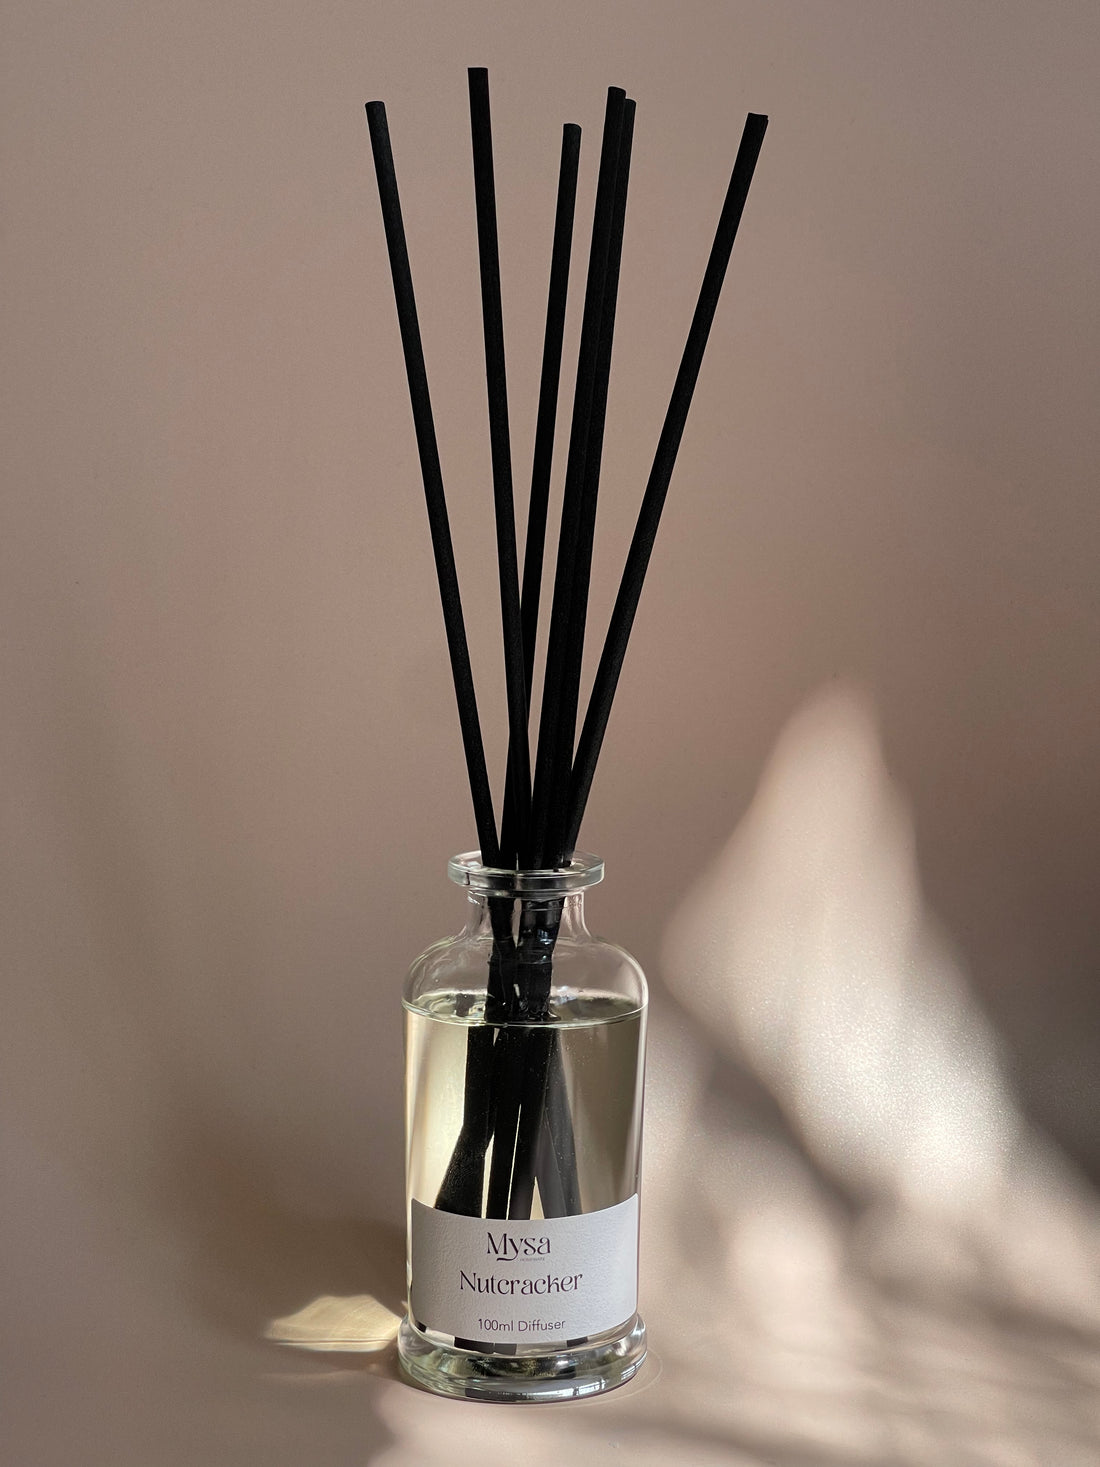 Nutcracker luxury reed diffuser in gift box, featuring a vegan base oil infused with nutcracker fragrance.